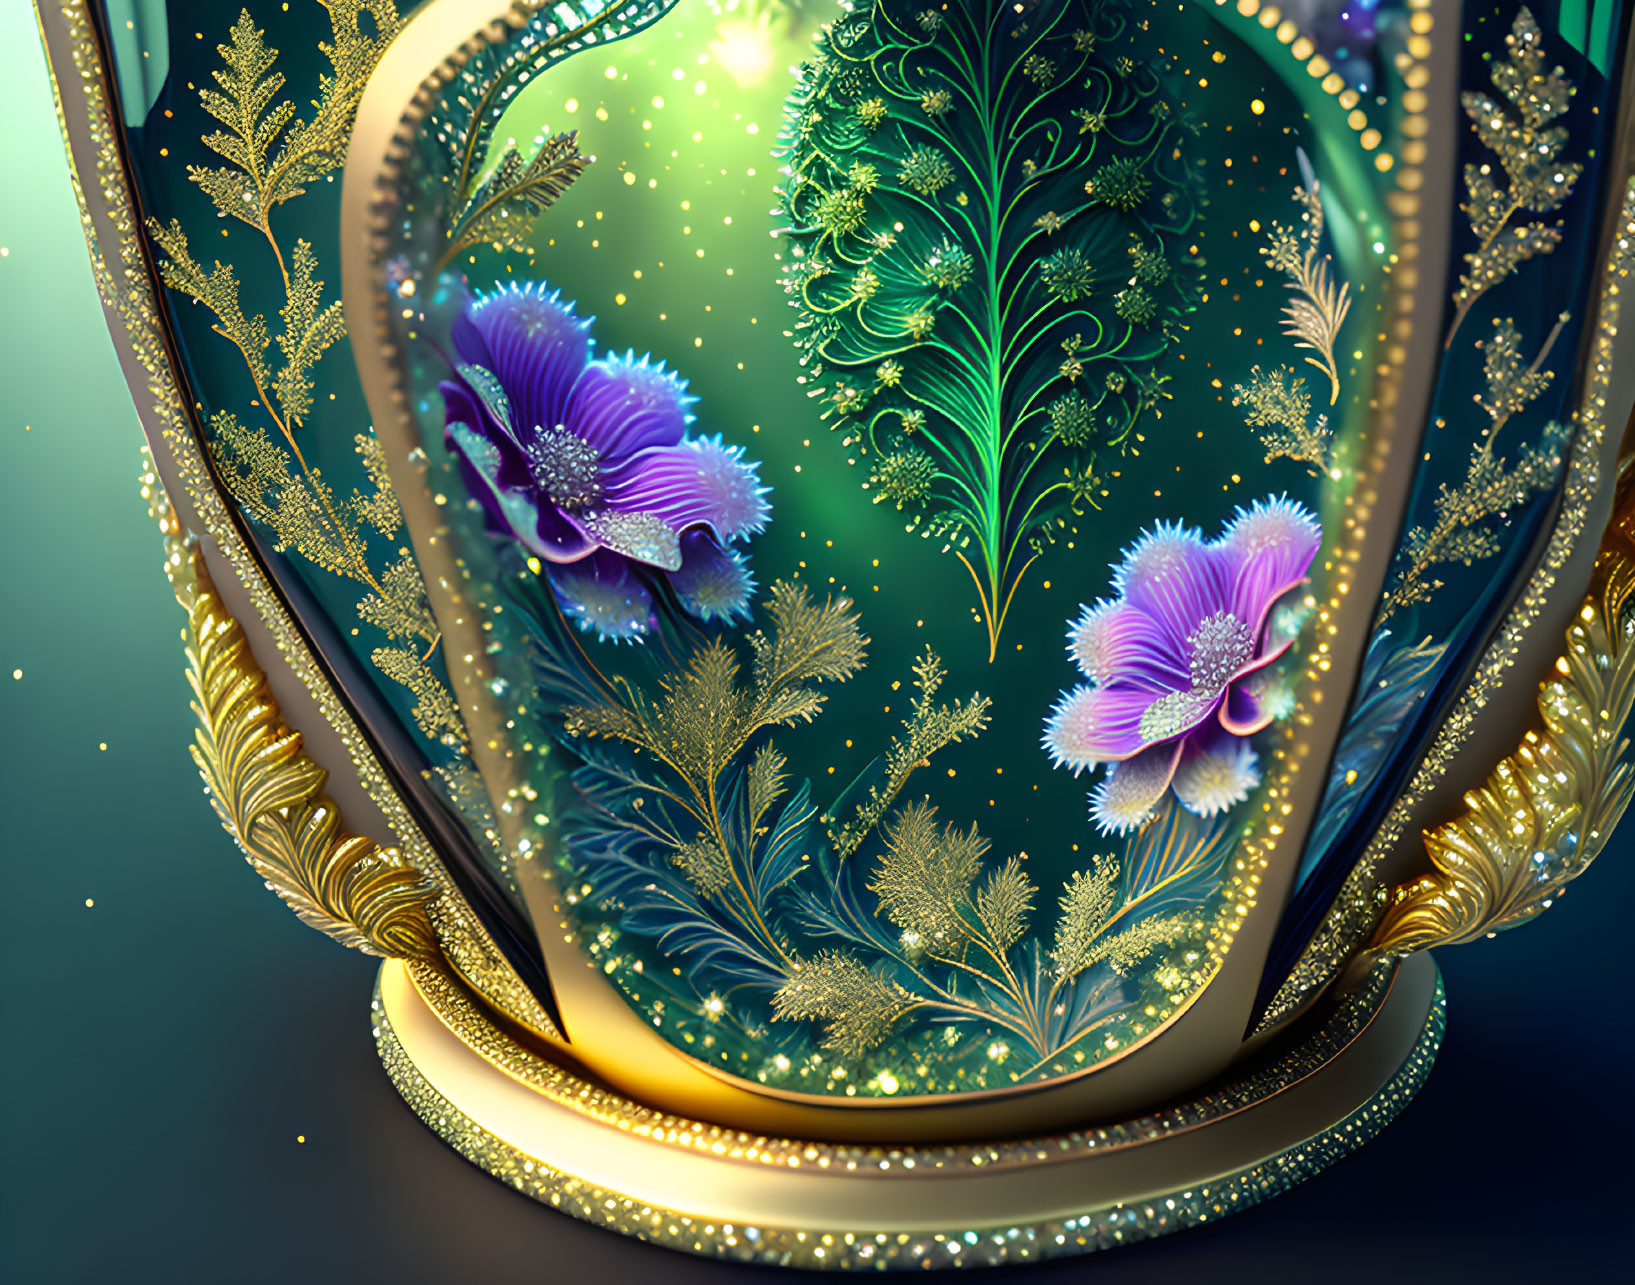 Intricate Golden Floral Frame Surrounding Purple Flowers on Teal Background